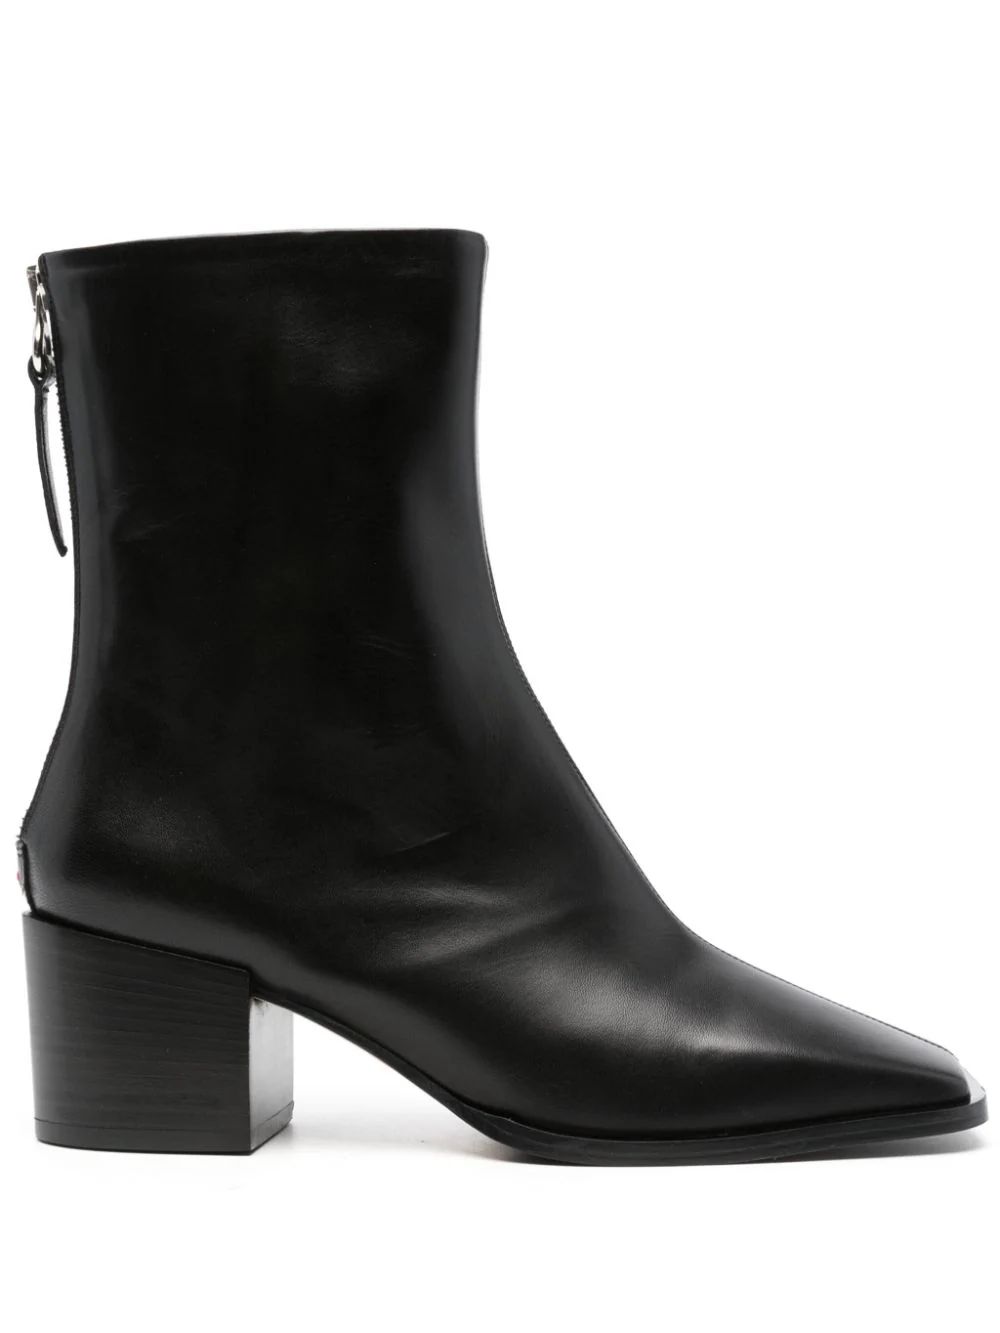 Amina 60mm leather boots | Farfetch Global